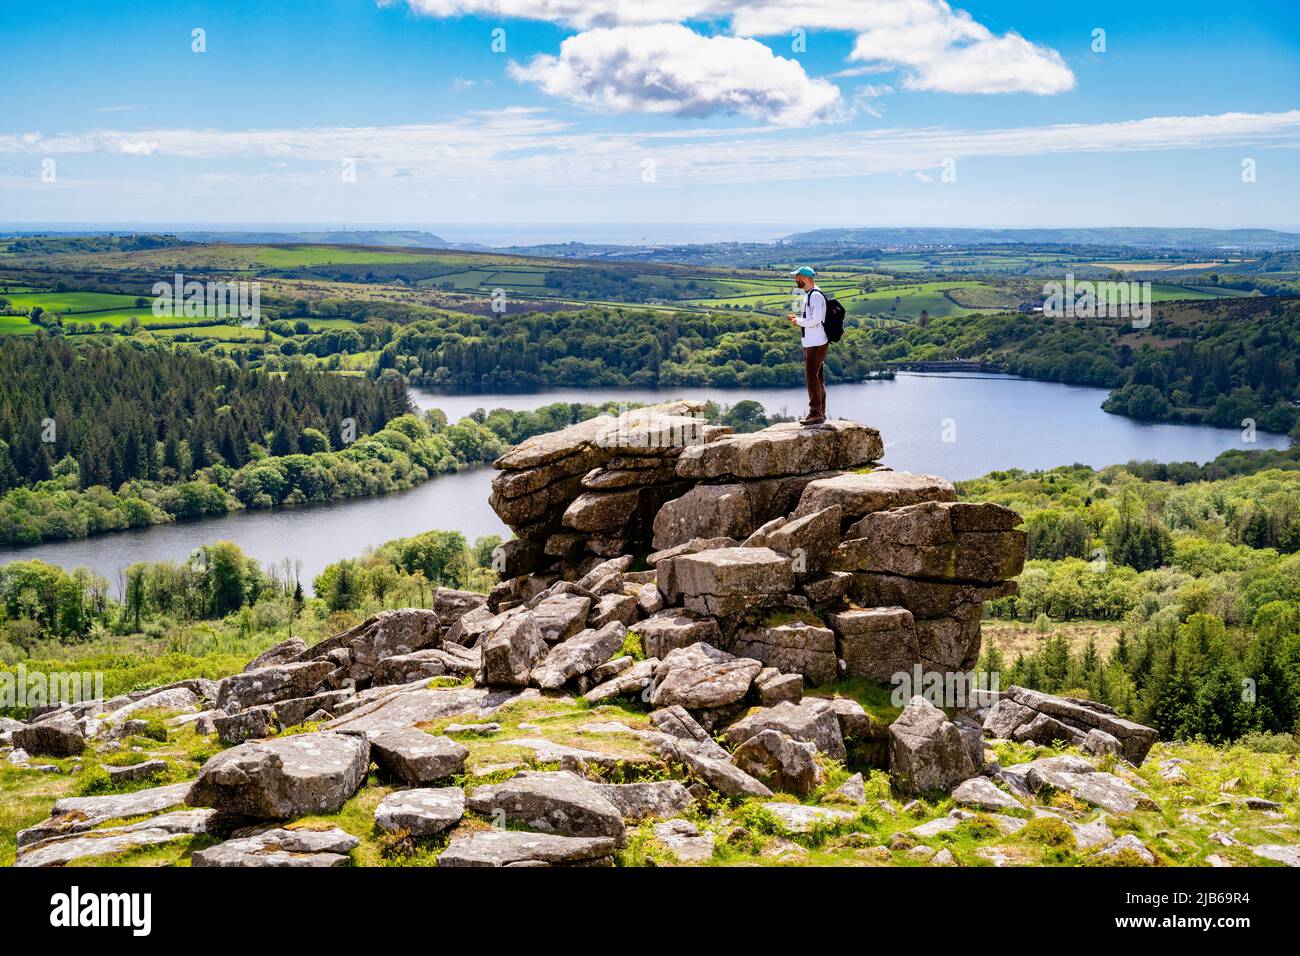 A walker stands on a granite outcrop on Lower Leather Tor, overlooking Burrator Reservoir, Dartmoor National Park, Devon, UK. Stock Photo